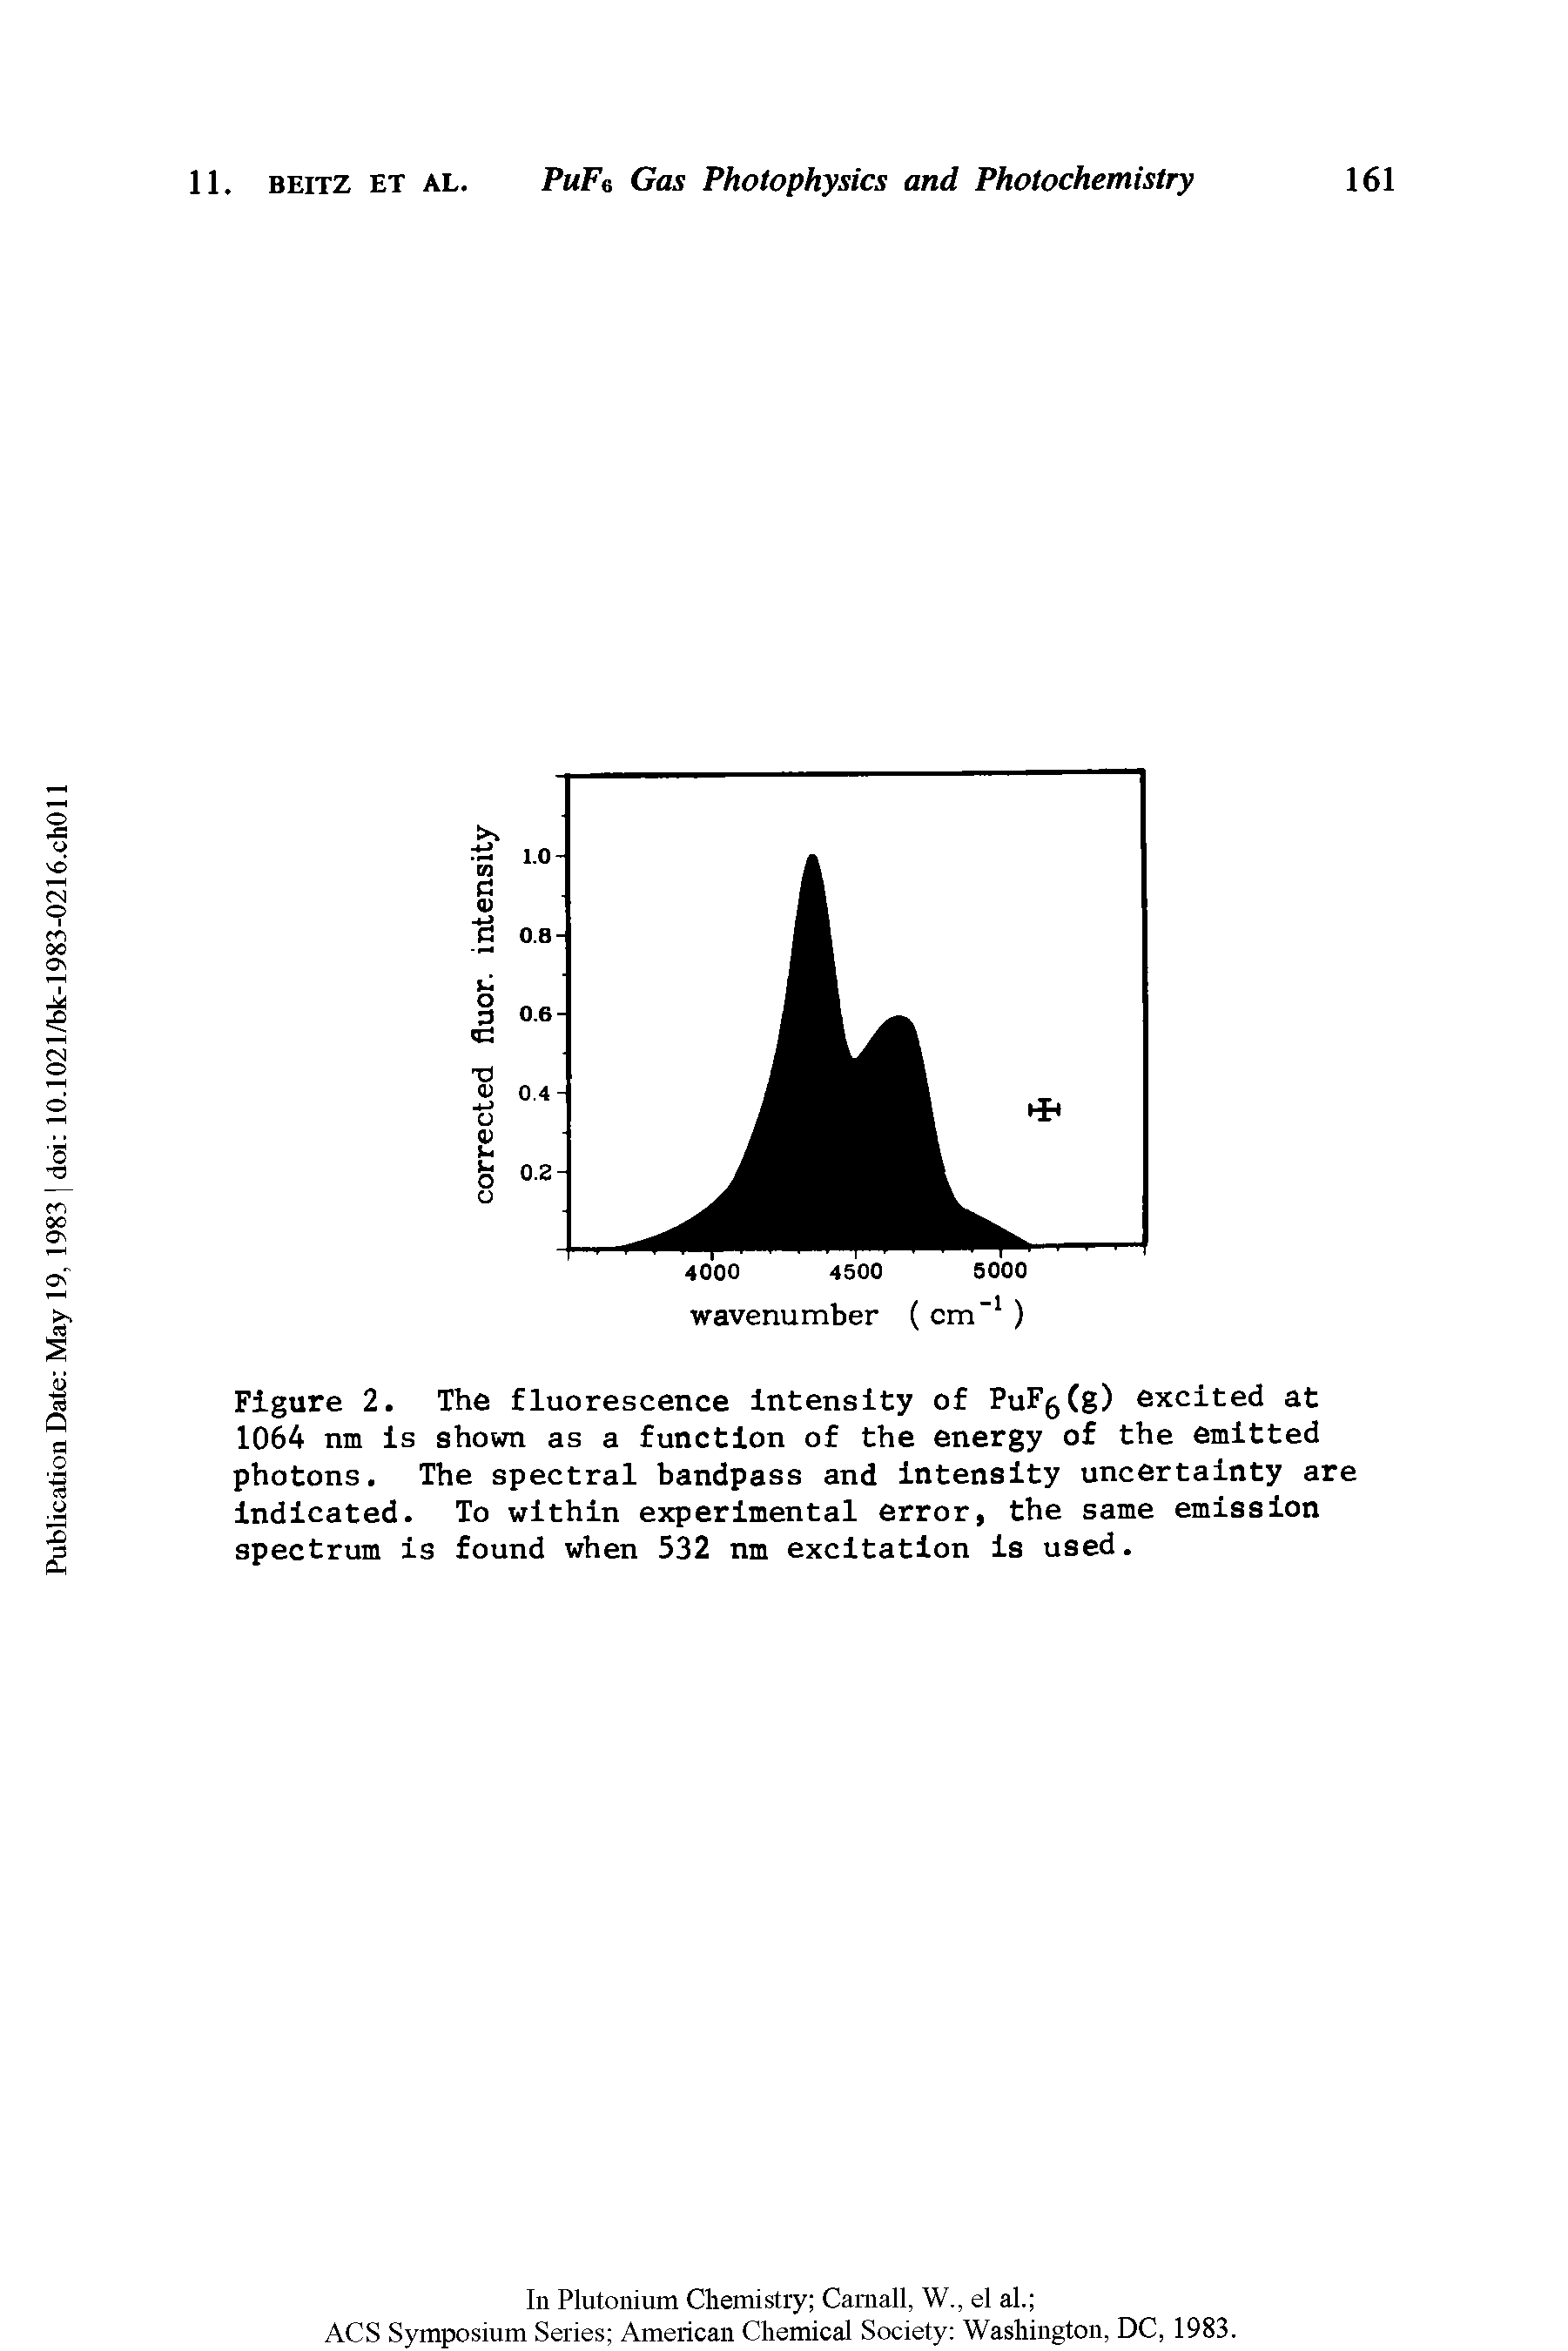 Figure 2. The fluorescence intensity of PuF Cg) excited at 1064 nm is shown as a function of the energy of the emitted photons. The spectral bandpass and intensity uncertainty are indicated. To within experimental error, the same emission spectrum is found when 532 nm excitation is used.